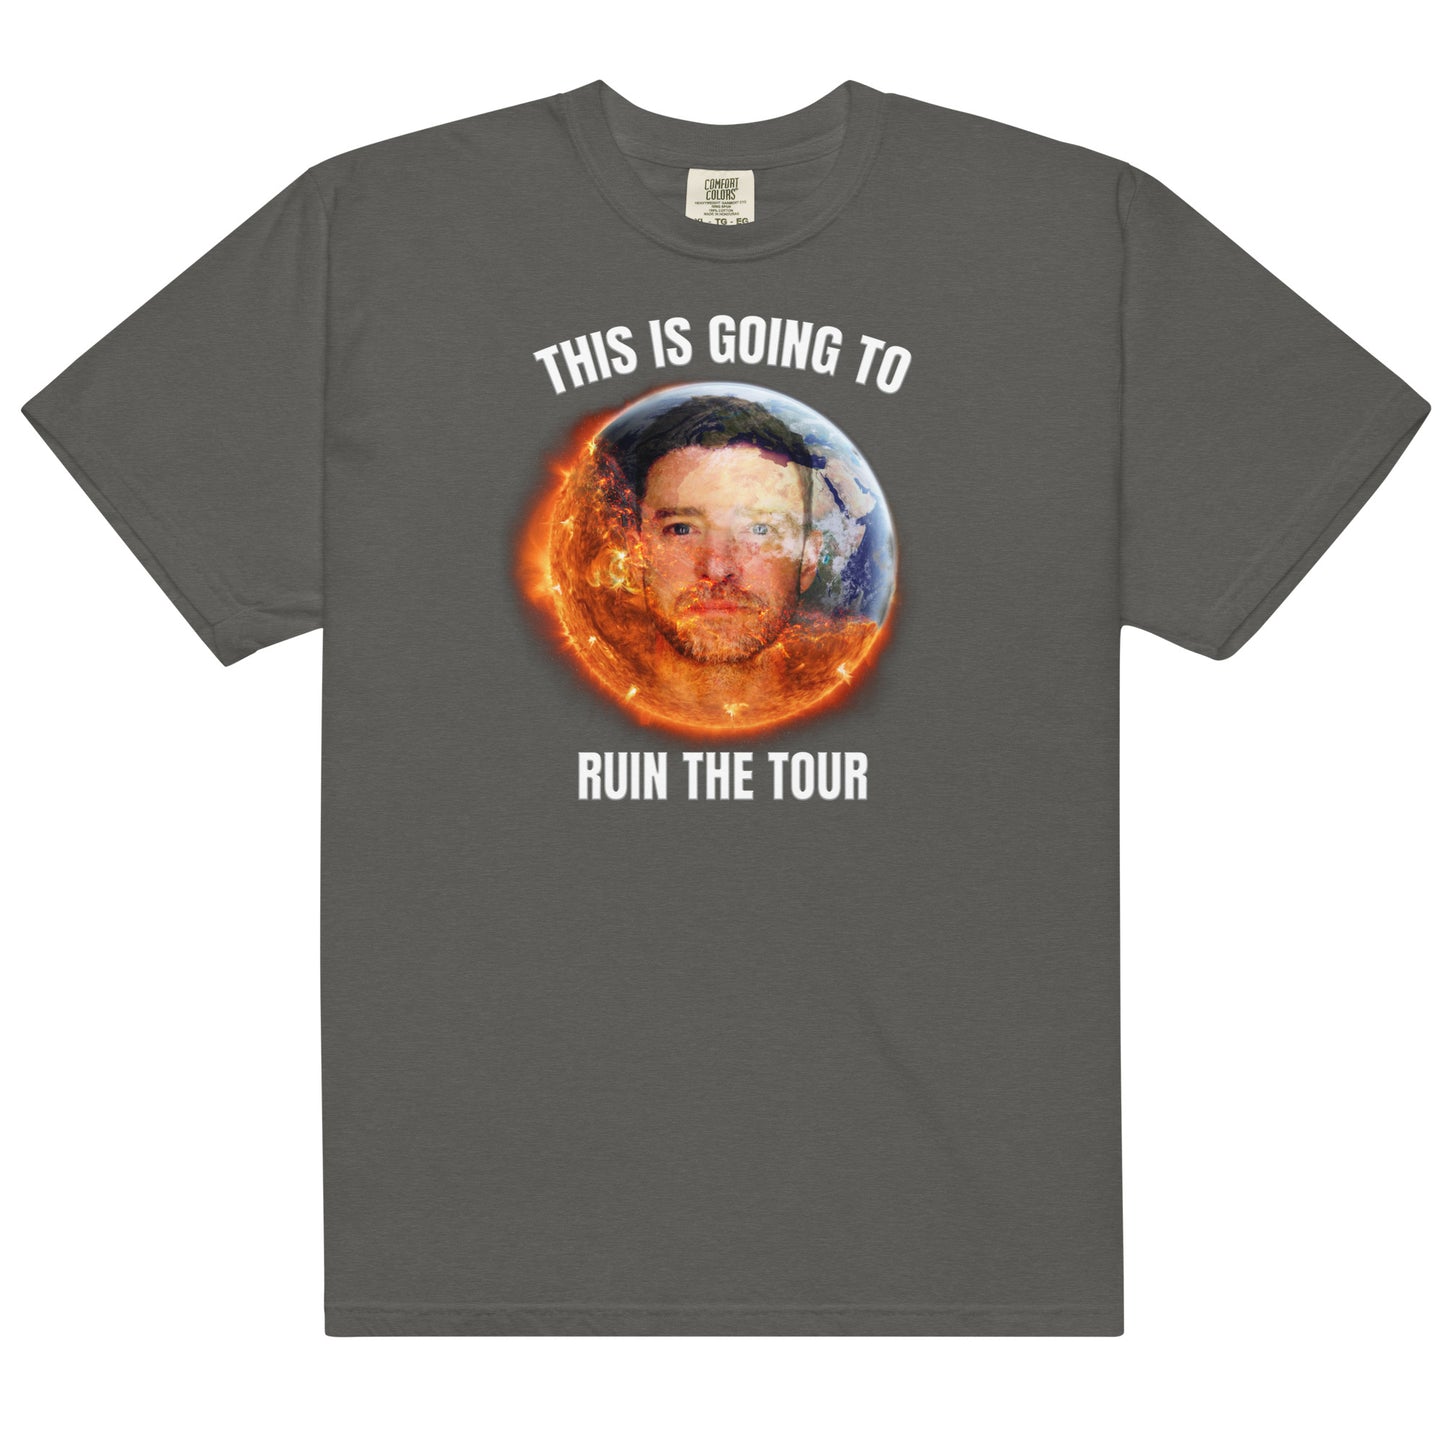 This is Going to Ruin the Tour Unisex t-shirt